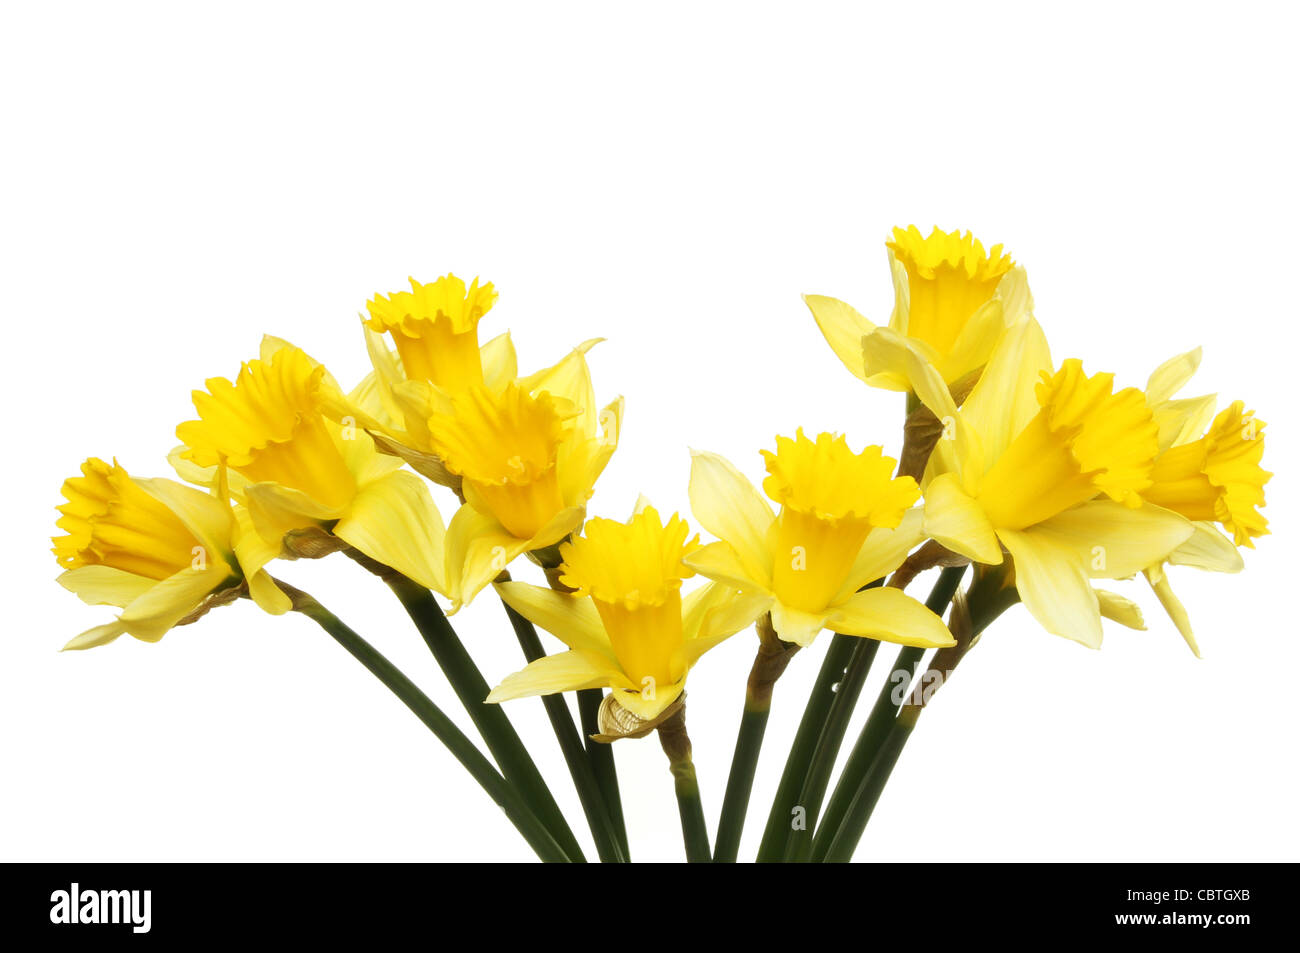 Spray of golden yellow daffodil flowers isolated against white Stock Photo